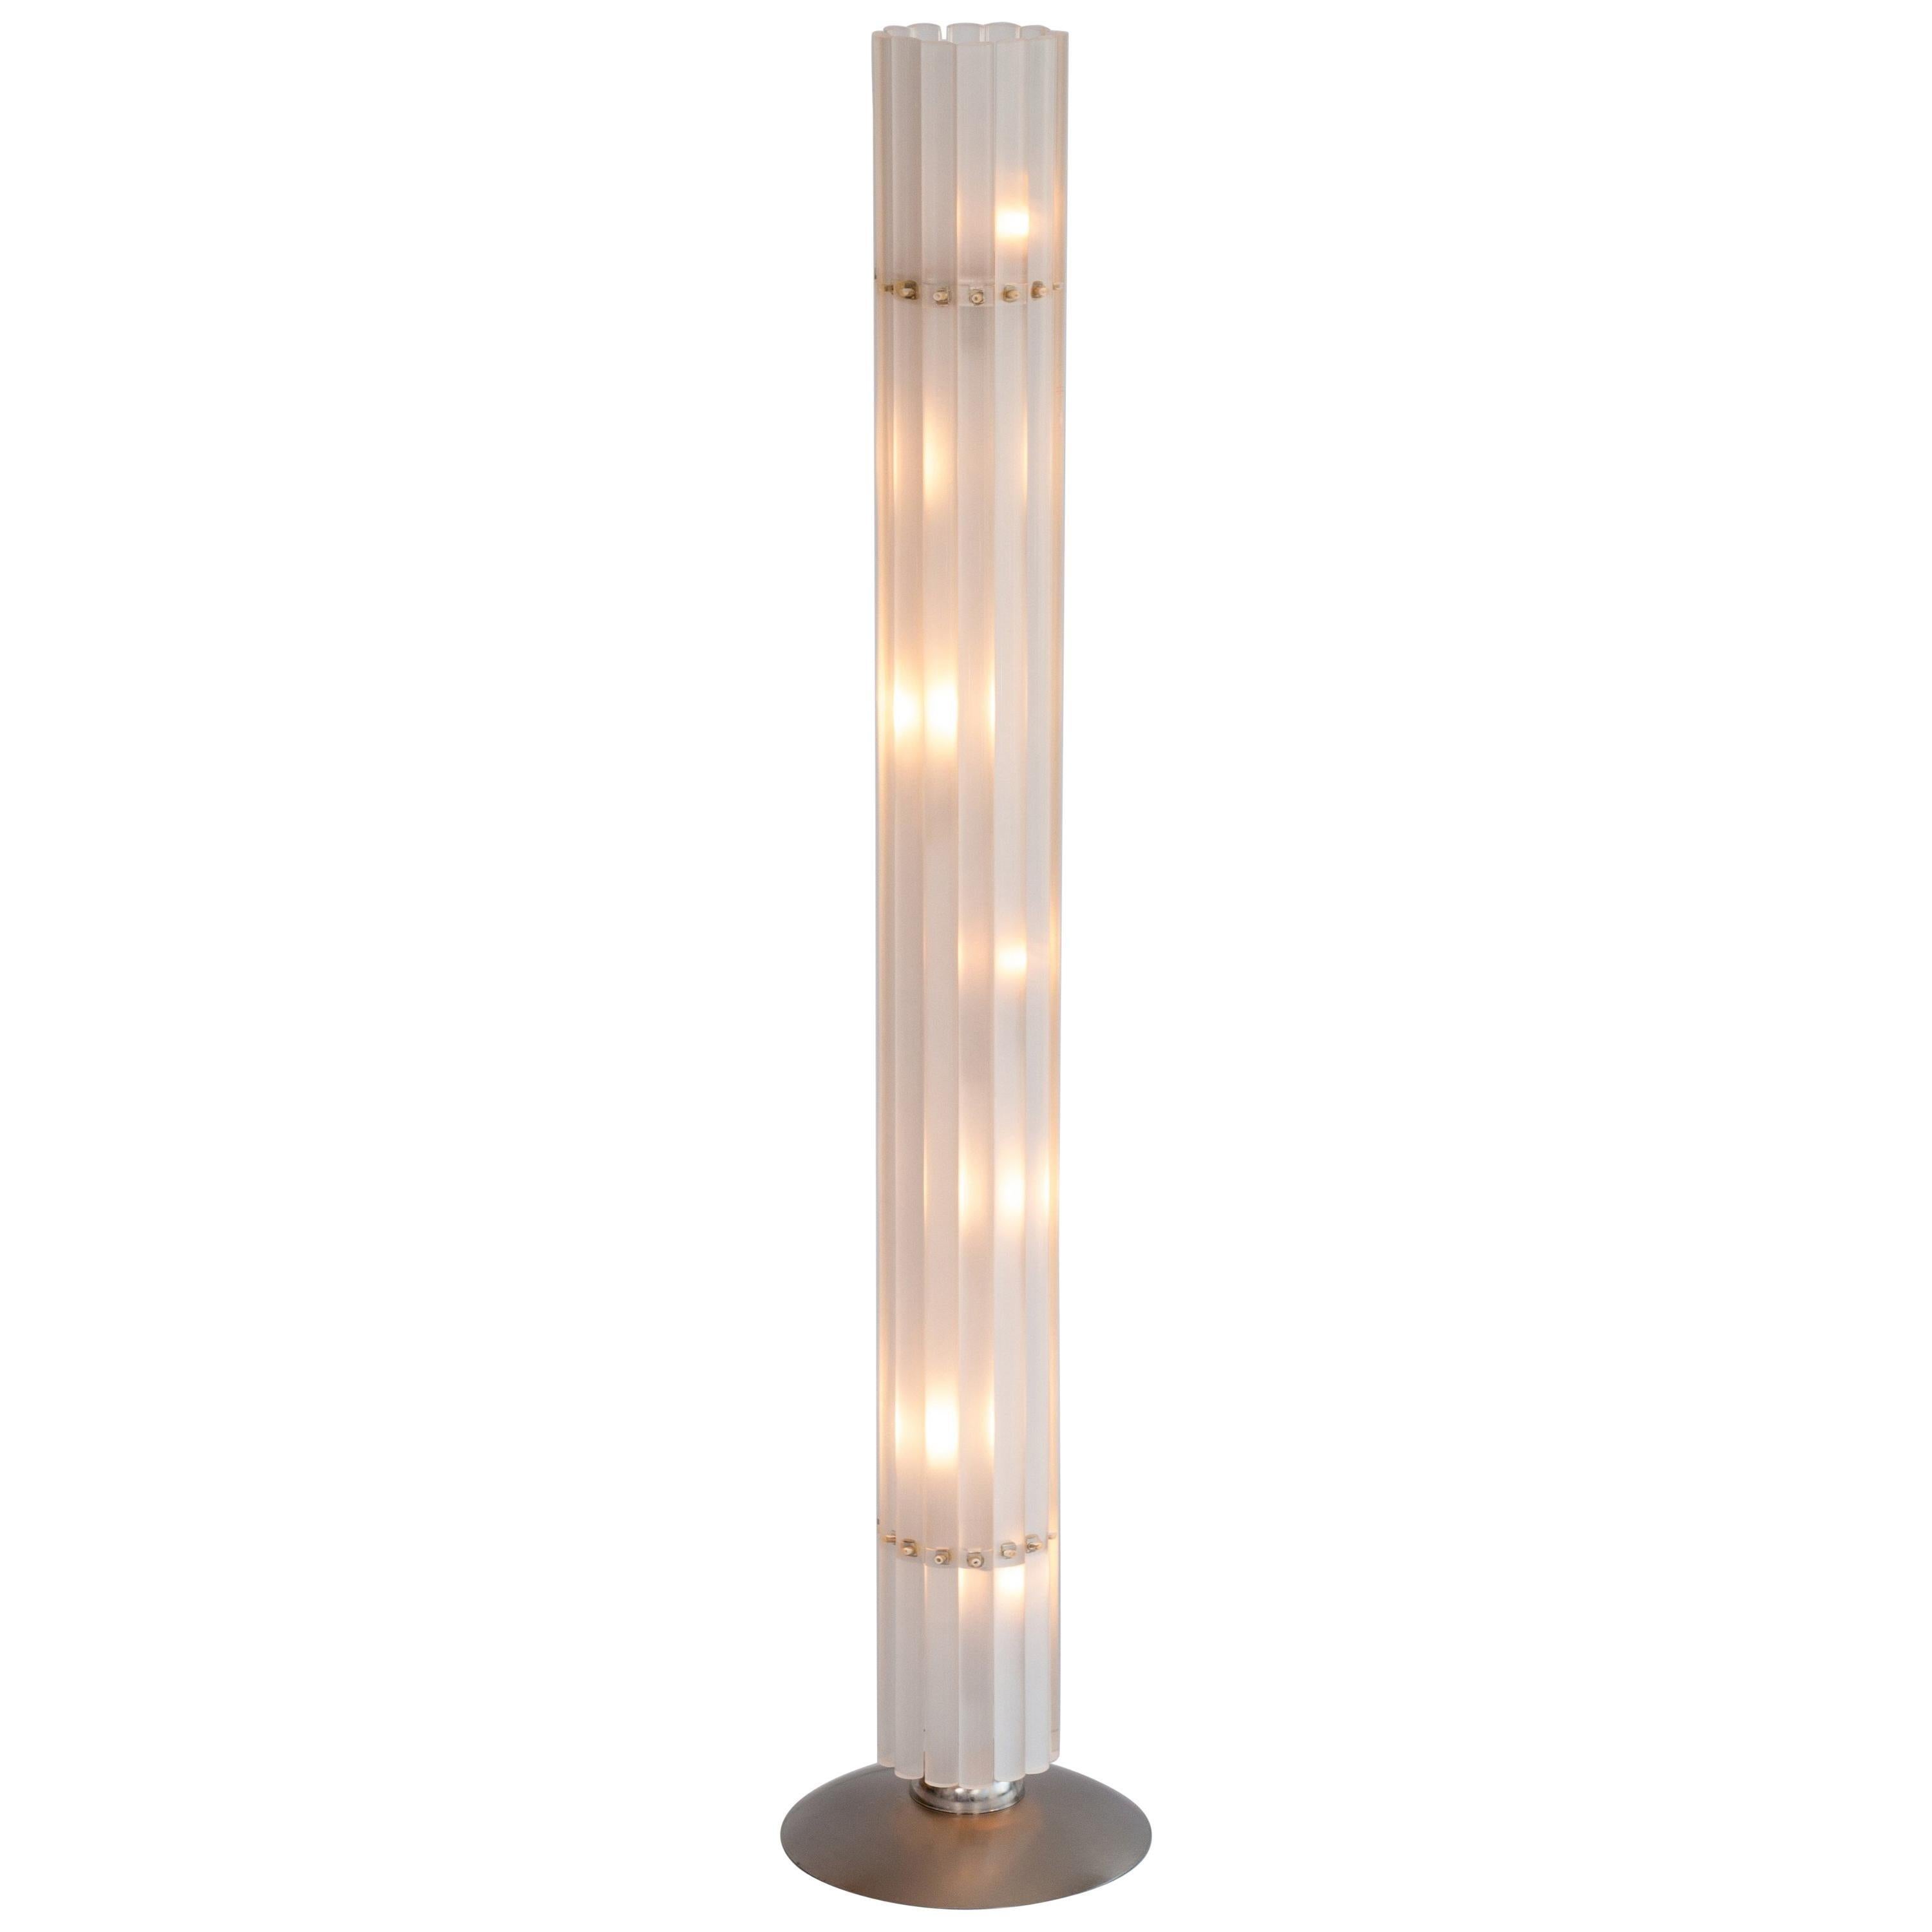 Bespoke White Cylinder Floor Lamp Murano Glass ArtistGiovanni Dalla Fina Italy.
Bespoke Brilliance: The Murano Glass Floor Lamp by Giovanni Dalla Fina.
Immerse your space in the timeless art of Murano glass with this exquisite floor lamp by renowned